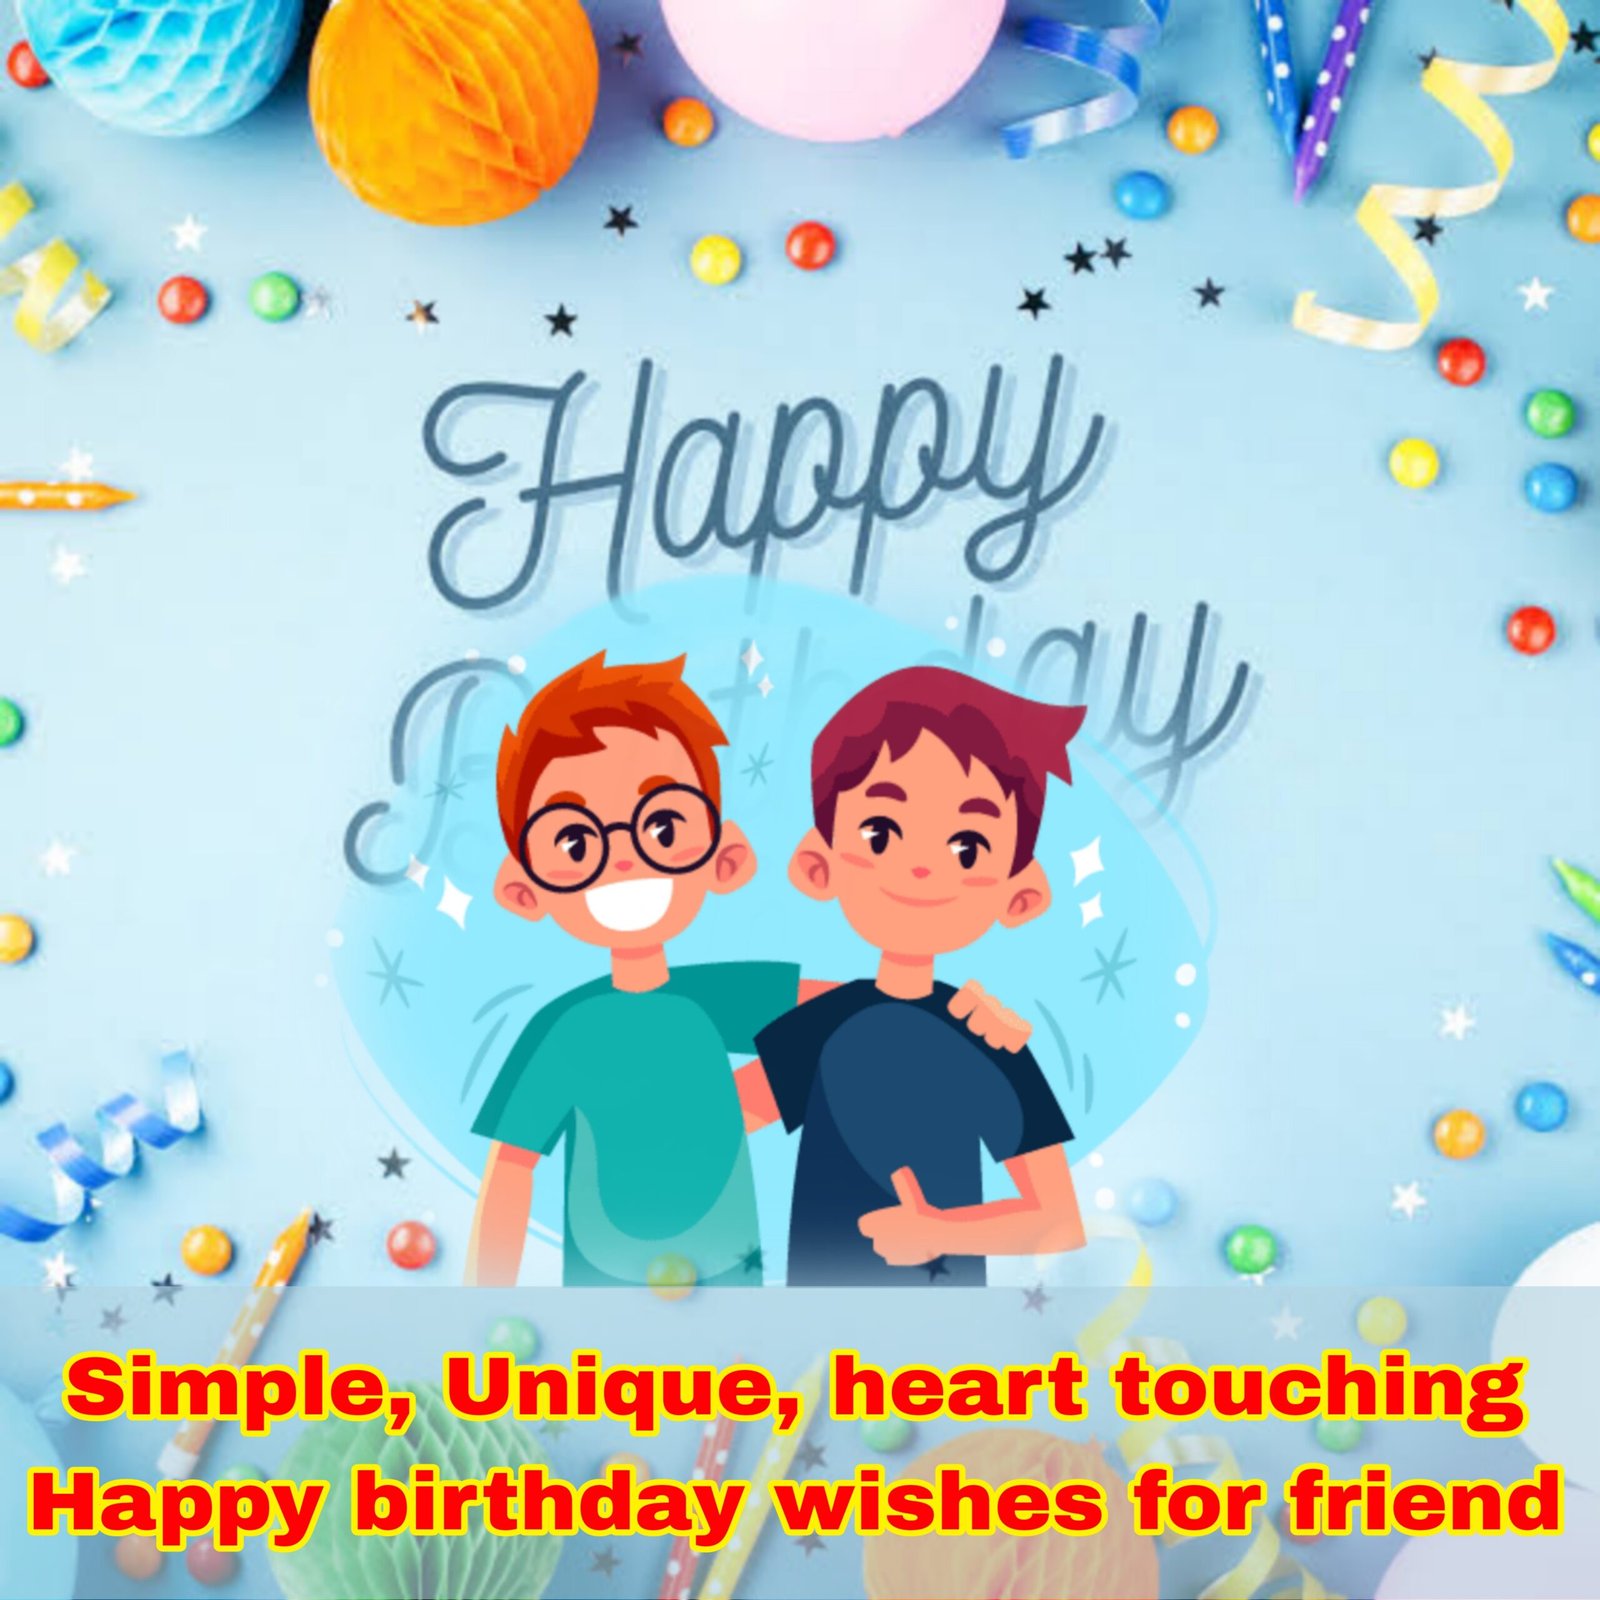 Simple, Unique, Funny, heart touching Happy birthday wishes for friend